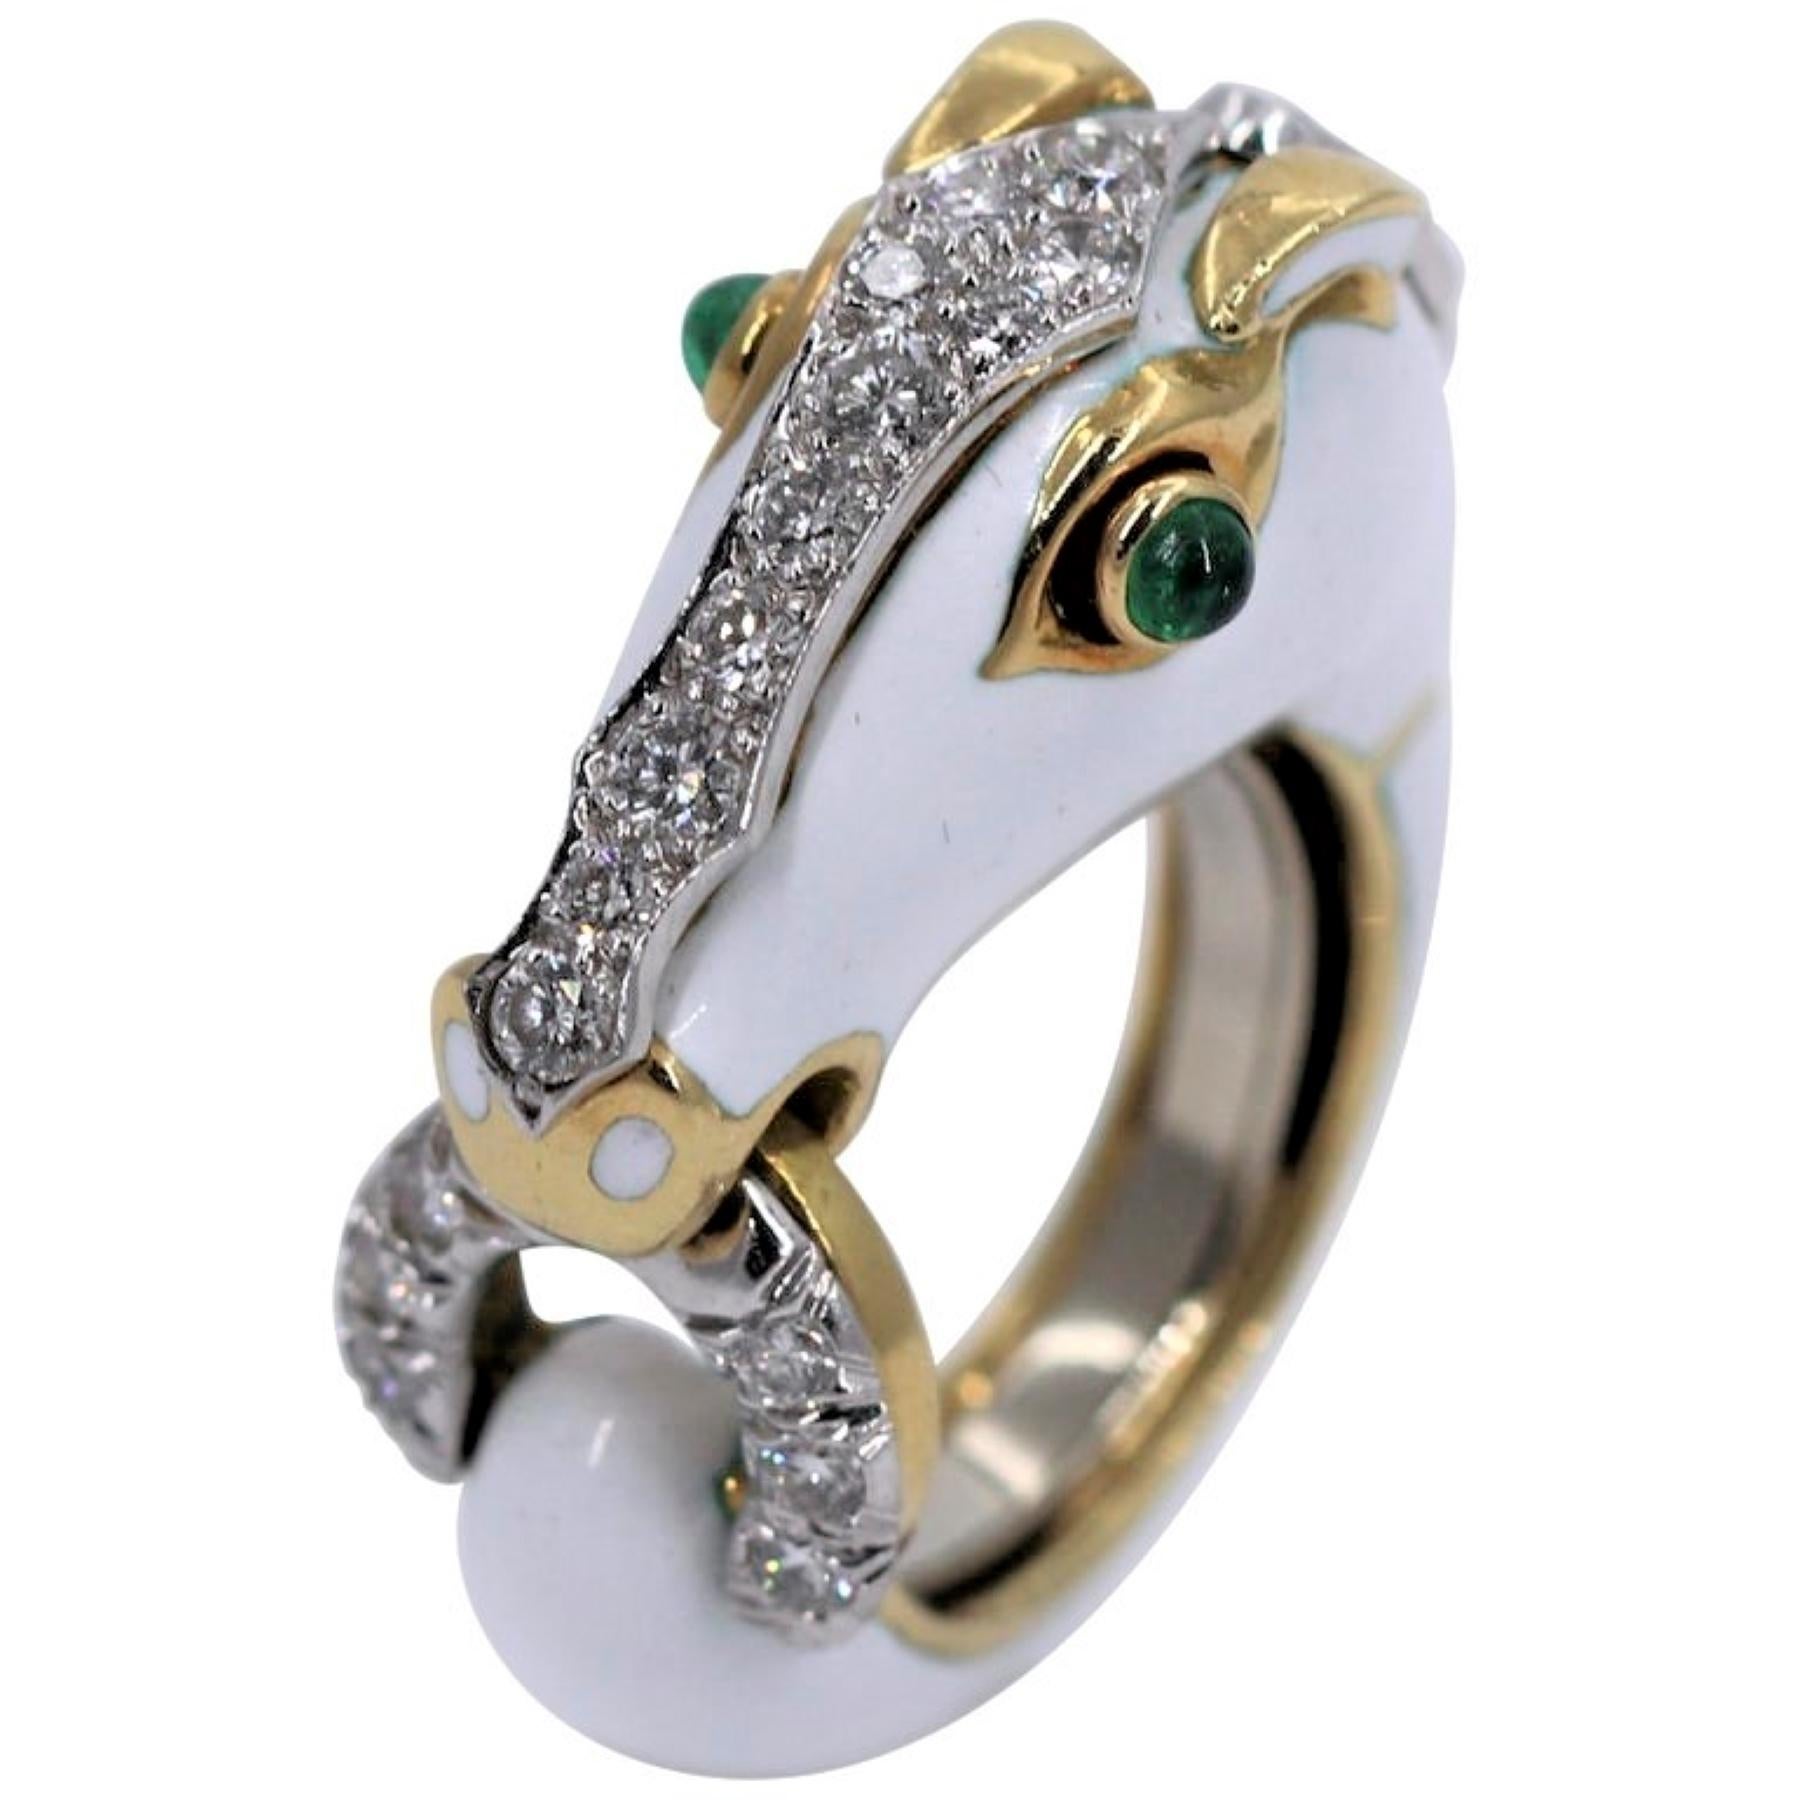 One of the classic animal designs of David Webb this horse is brought to life through the use of 18 karat yellow gold, platinum, diamonds, emeralds, and enamel. Set with a assorted round brilliant cut diamonds weighing a total weight of